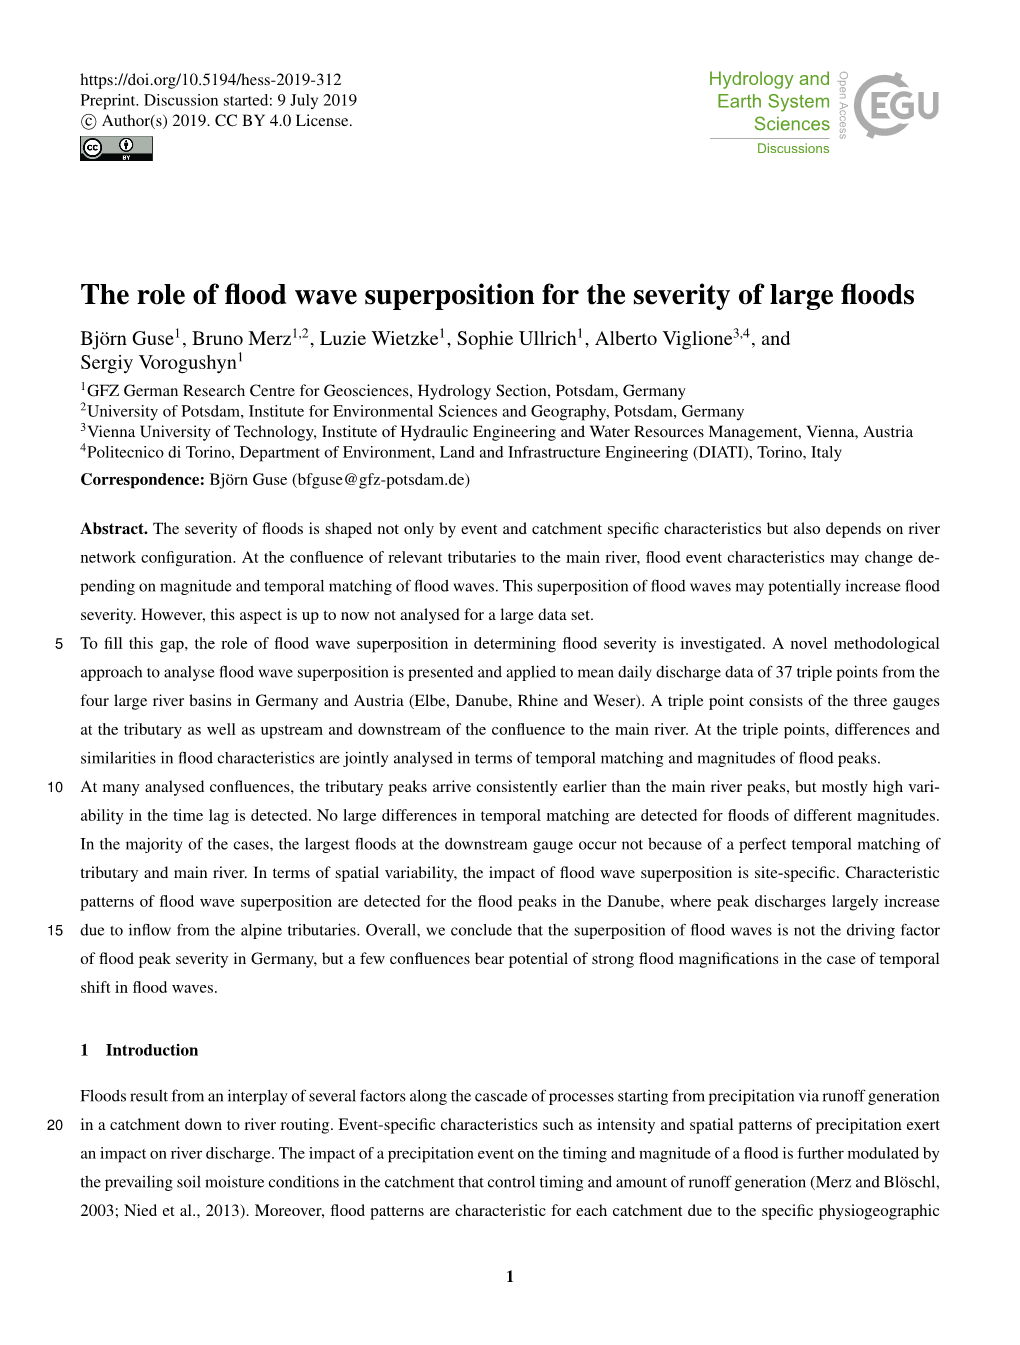 The Role of Flood Wave Superposition for the Severity of Large Floods